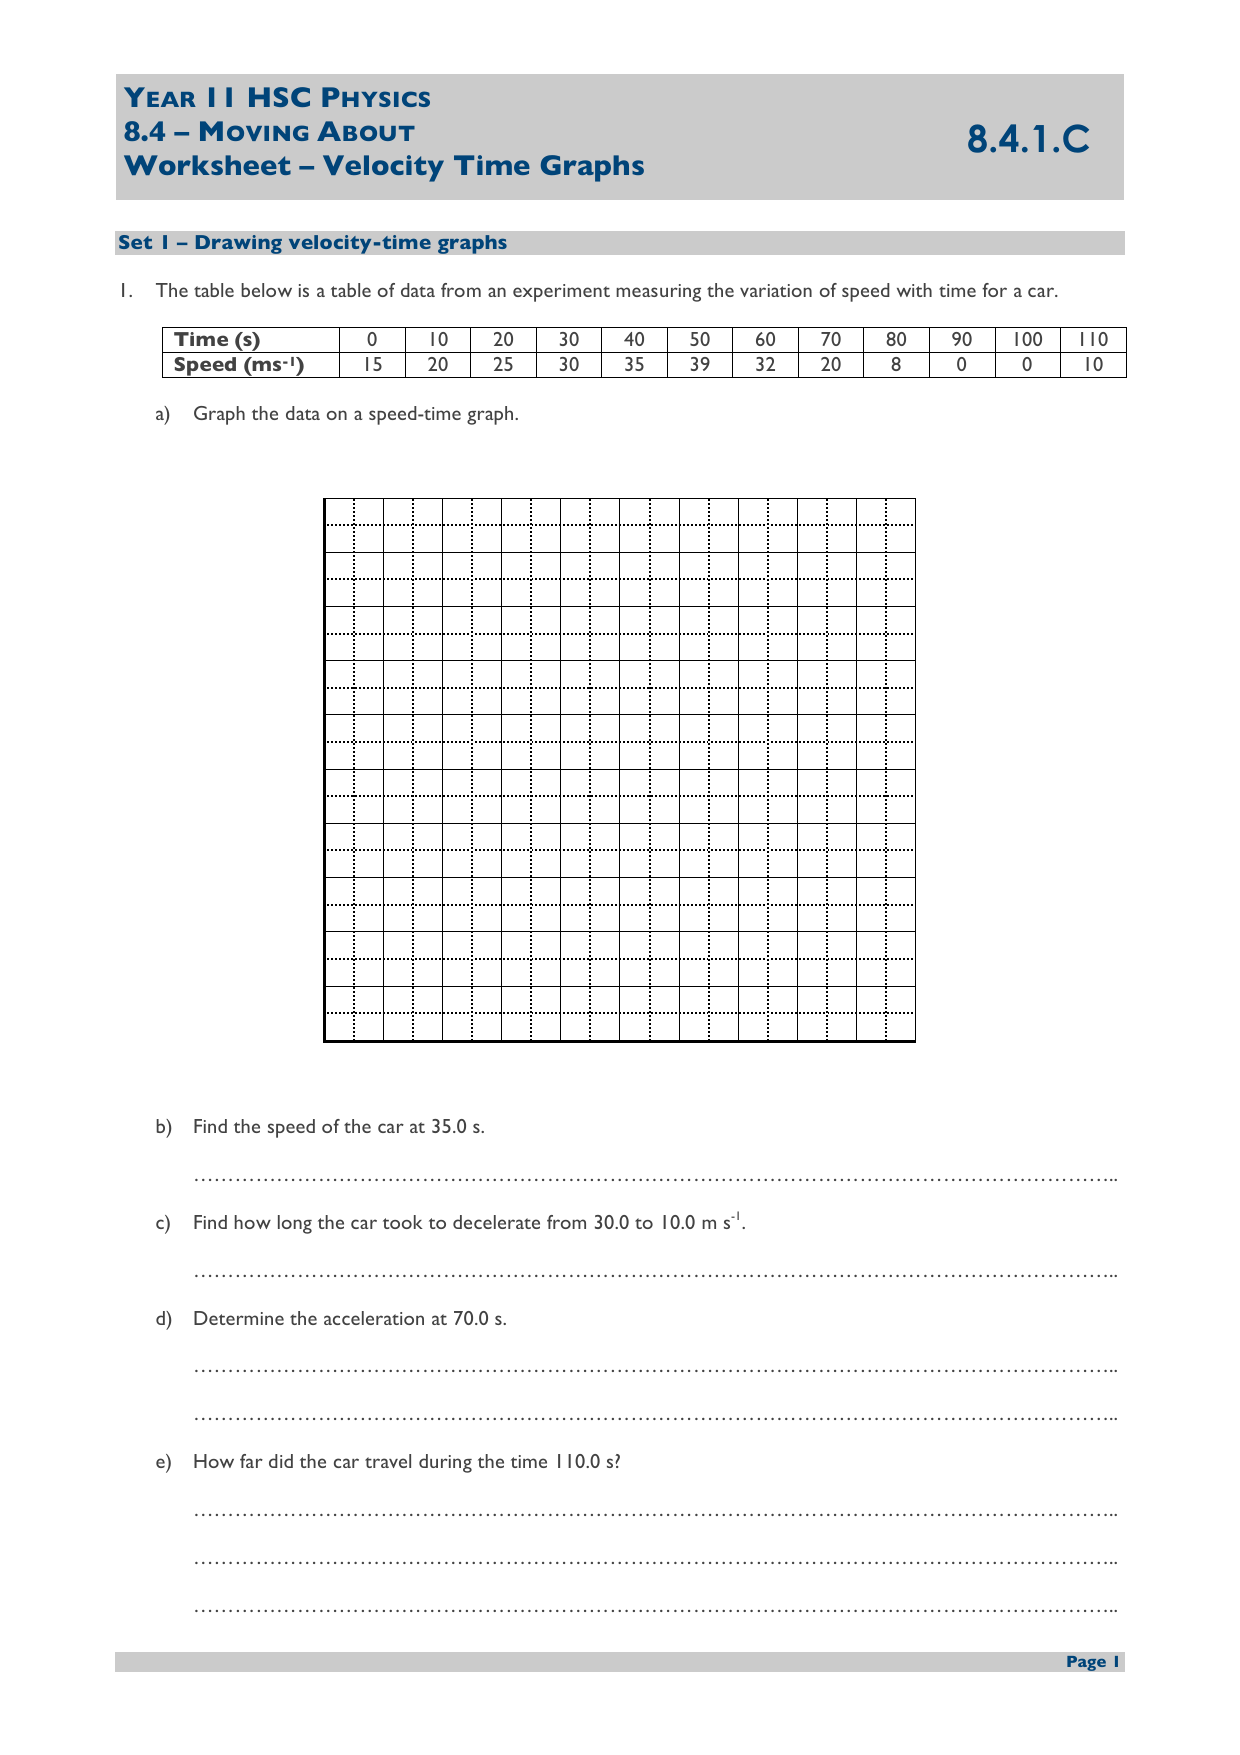 Velocity time graphs 22.22.222 With Velocity Time Graph Worksheet